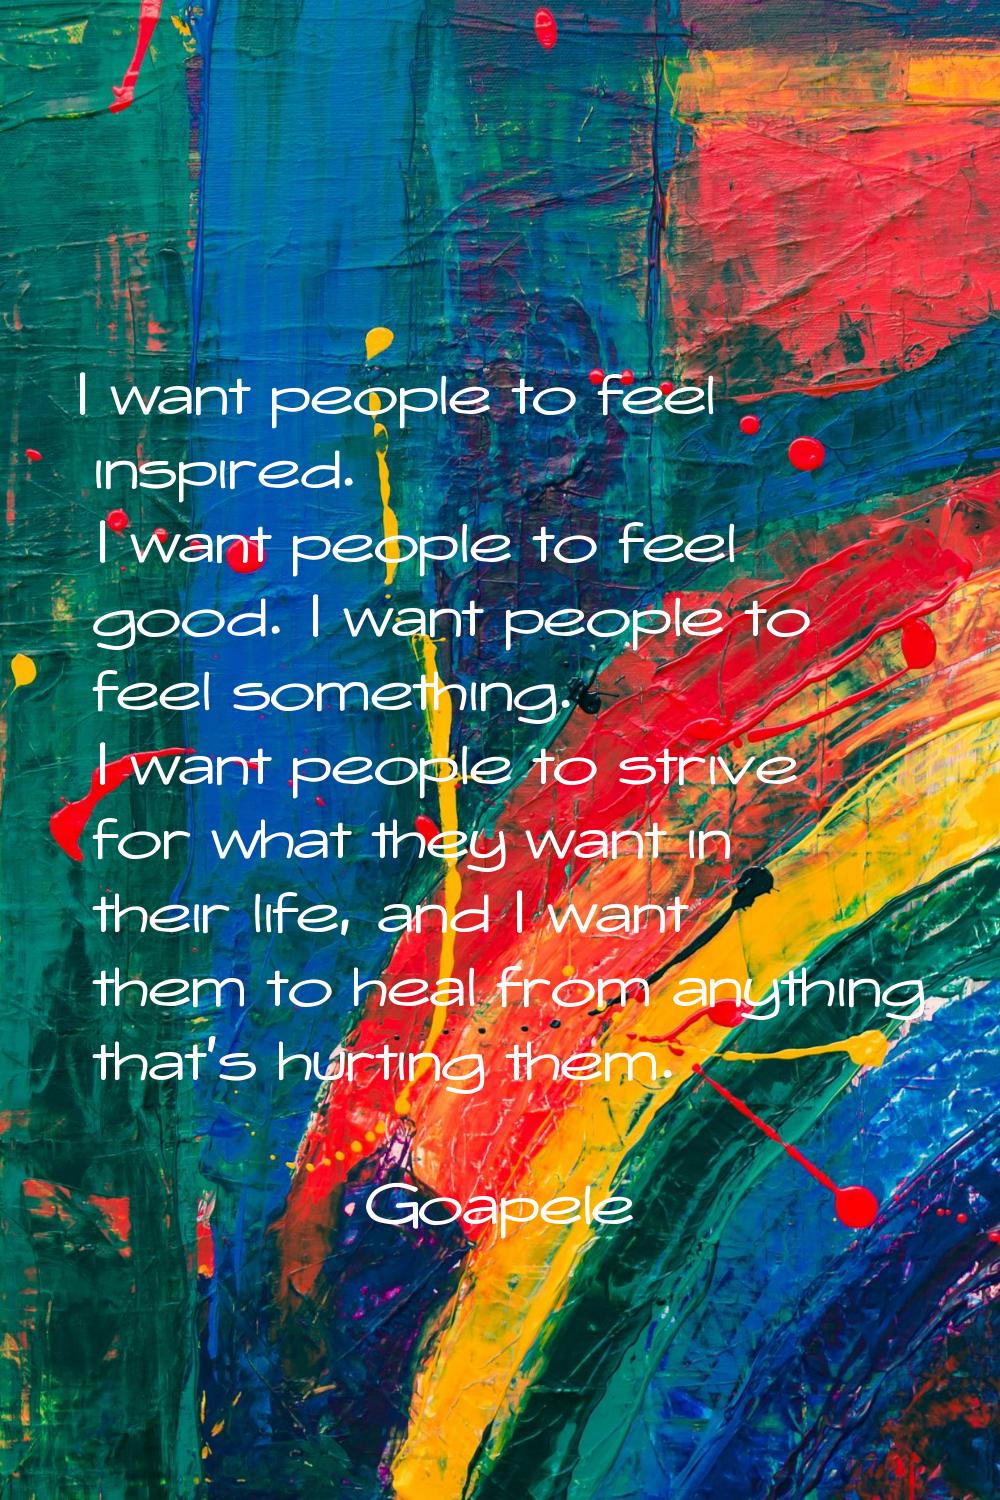 I want people to feel inspired. I want people to feel good. I want people to feel something. I want